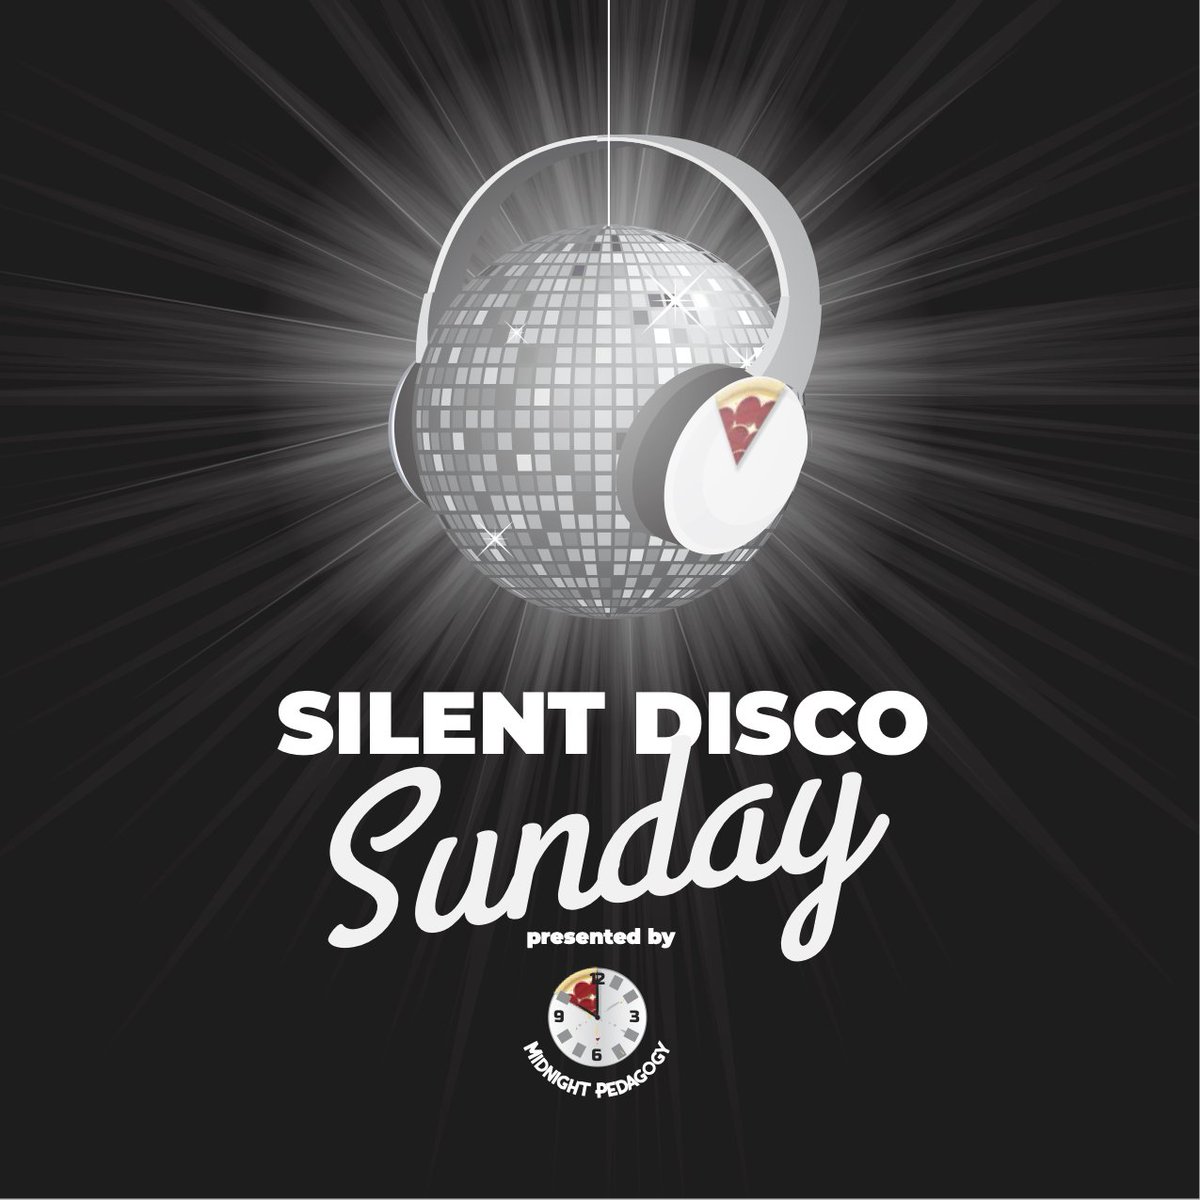 I hope you all are getting ready for the #SilentDiscoSunday at #VirtualSpringCUE! Tonight 3/21, 8-10pm Even if you're not registered for #SpringCUE, we'd love for you to join the fun. RSVP below 👇🏽 bit.ly/SilentDiscoSun…